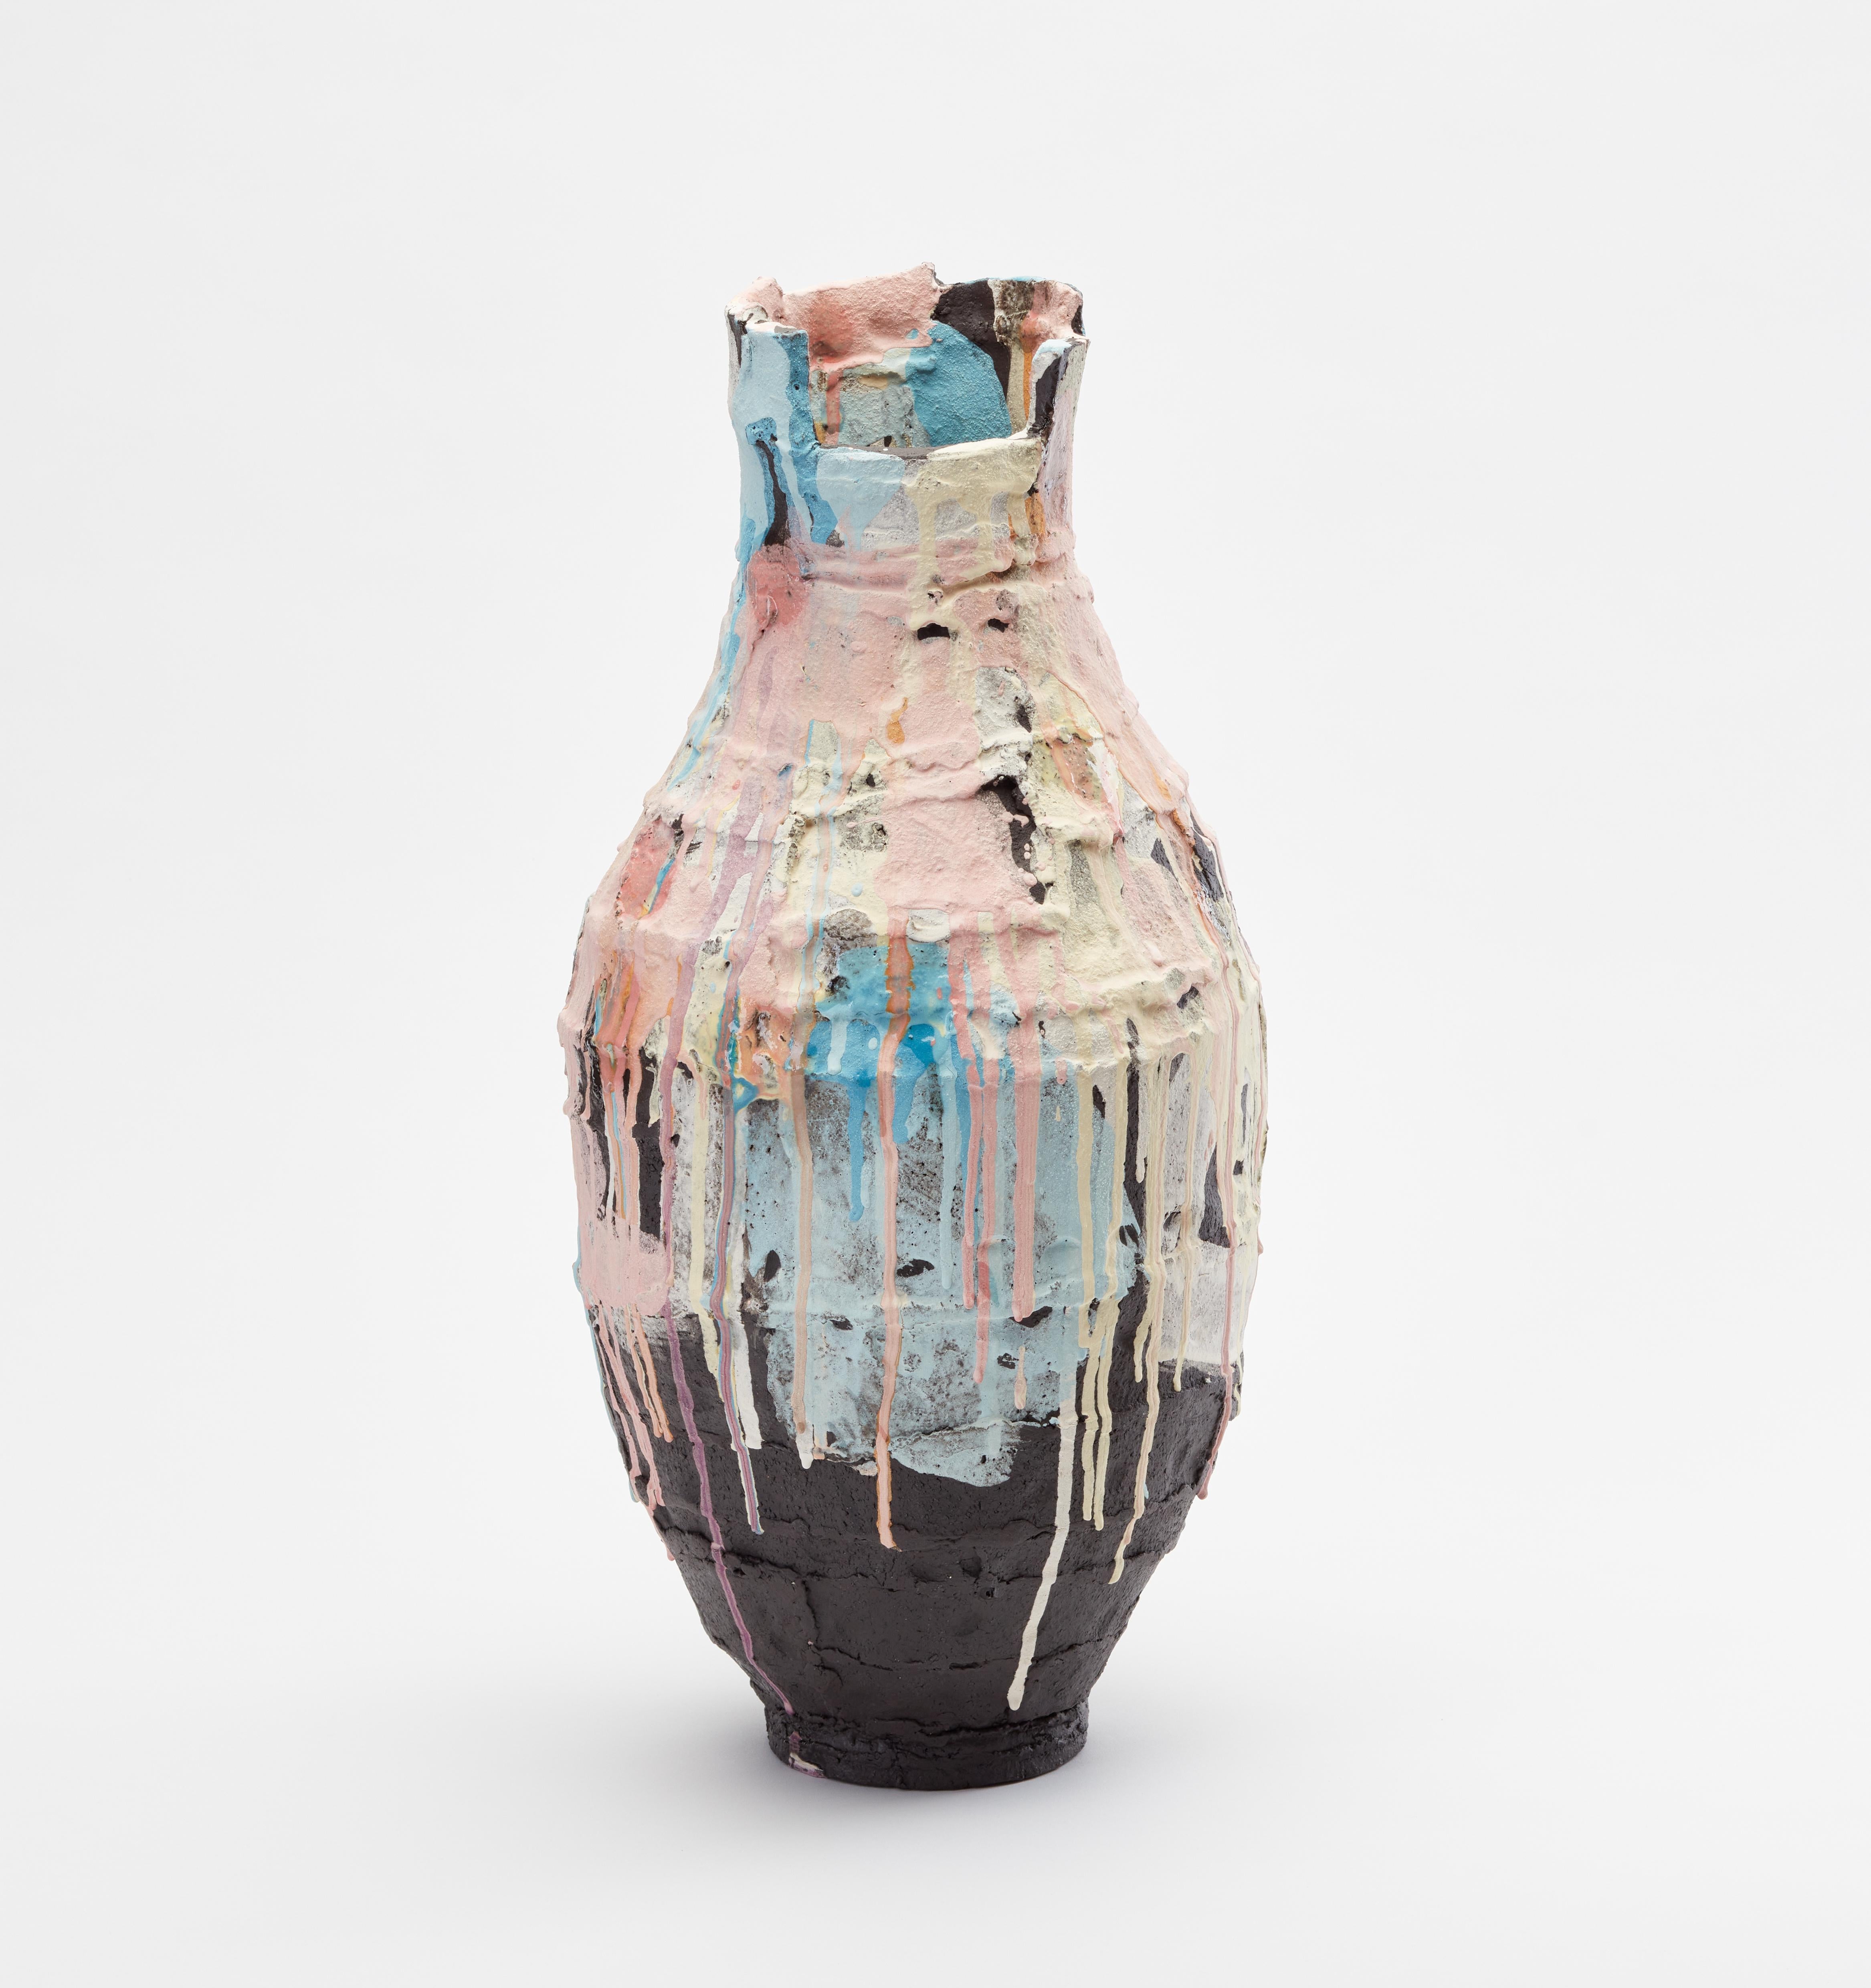 Curruca vase by Elke Sada.
Unique piece.
Dimensions: W 22 x D 23 x H 55 cm.
Materials: black grogged clay, coloured slips, transparent glaze.

What is fascinating and striking about Elke Sada’s ceramic art is not only the radiance of movement